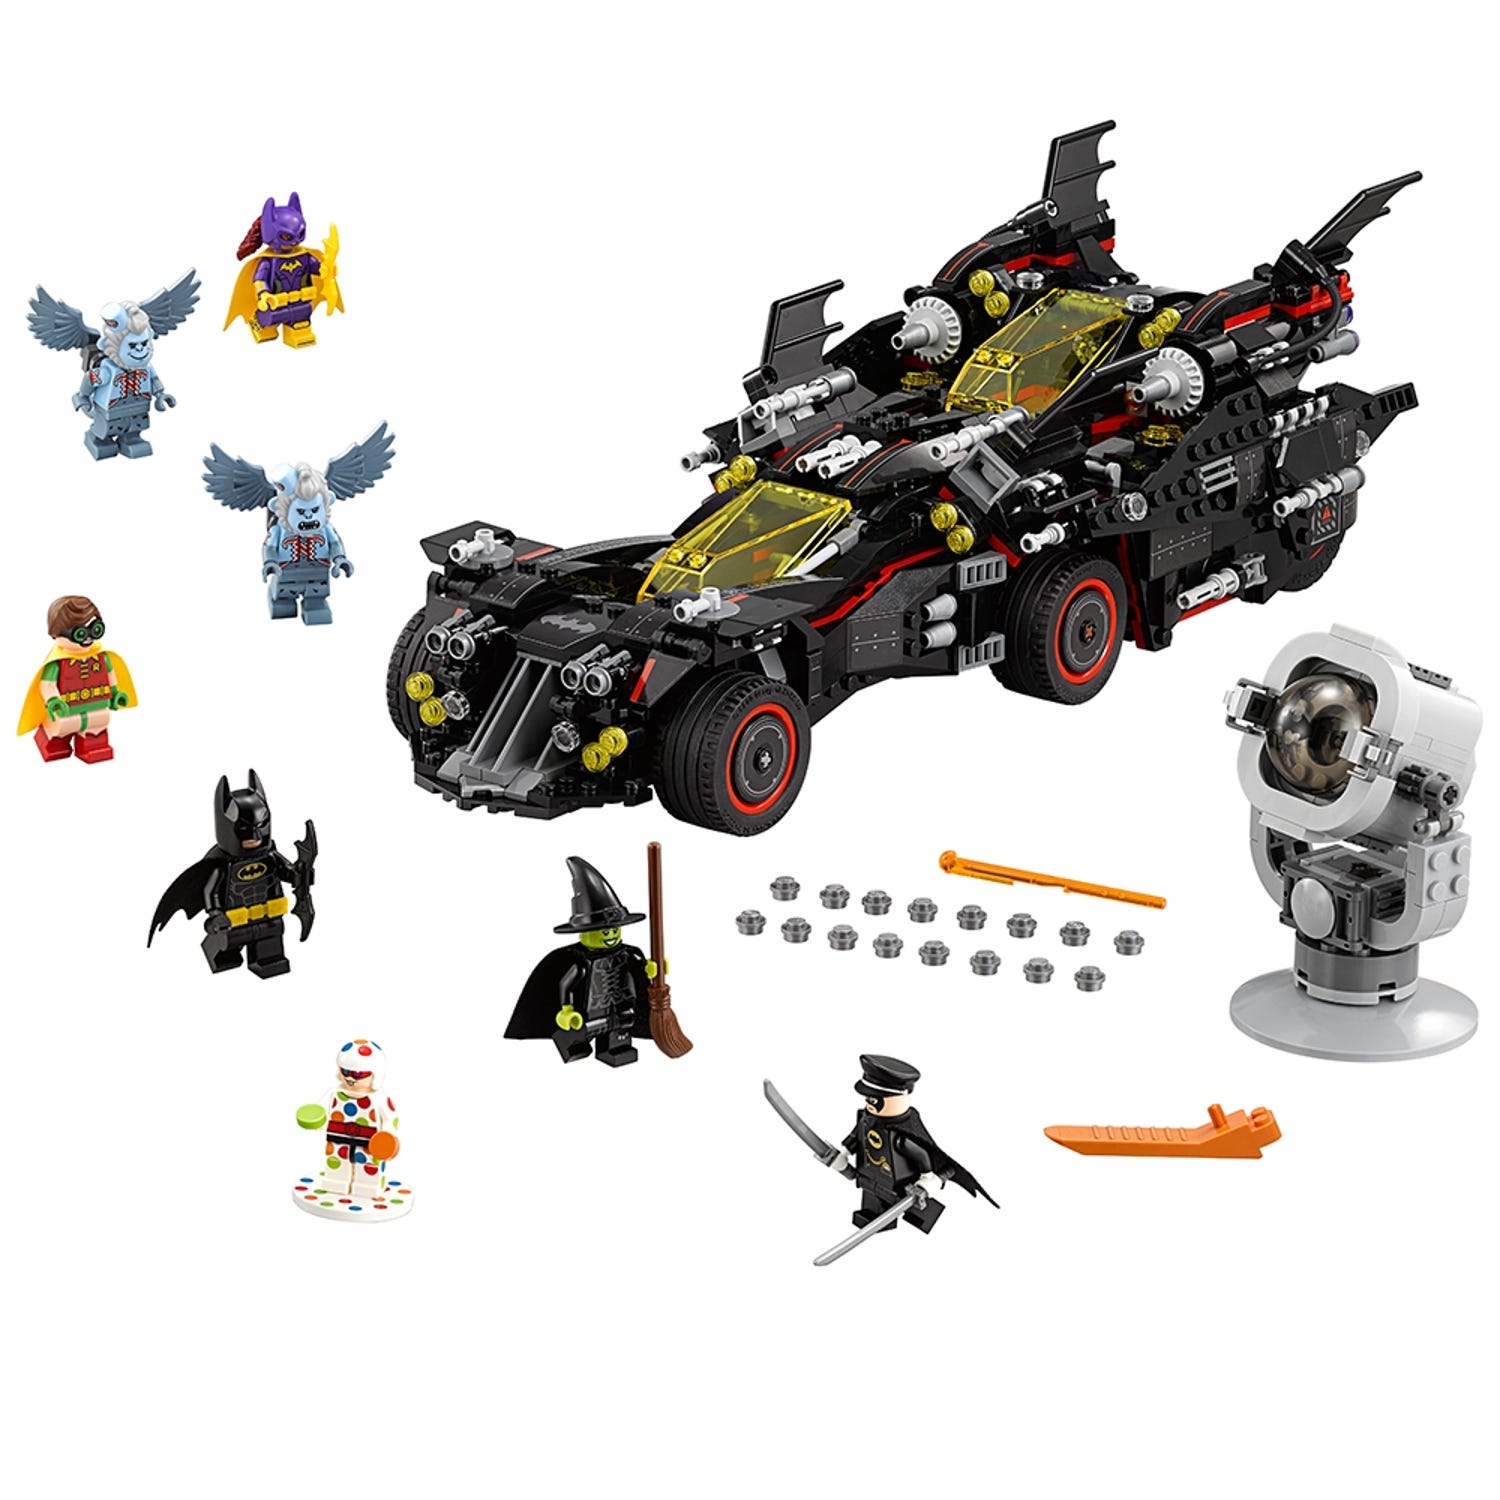 The Ultimate Batmobile 70917 | THE LEGO® BATMAN MOVIE | Buy online at the LEGO® Shop US